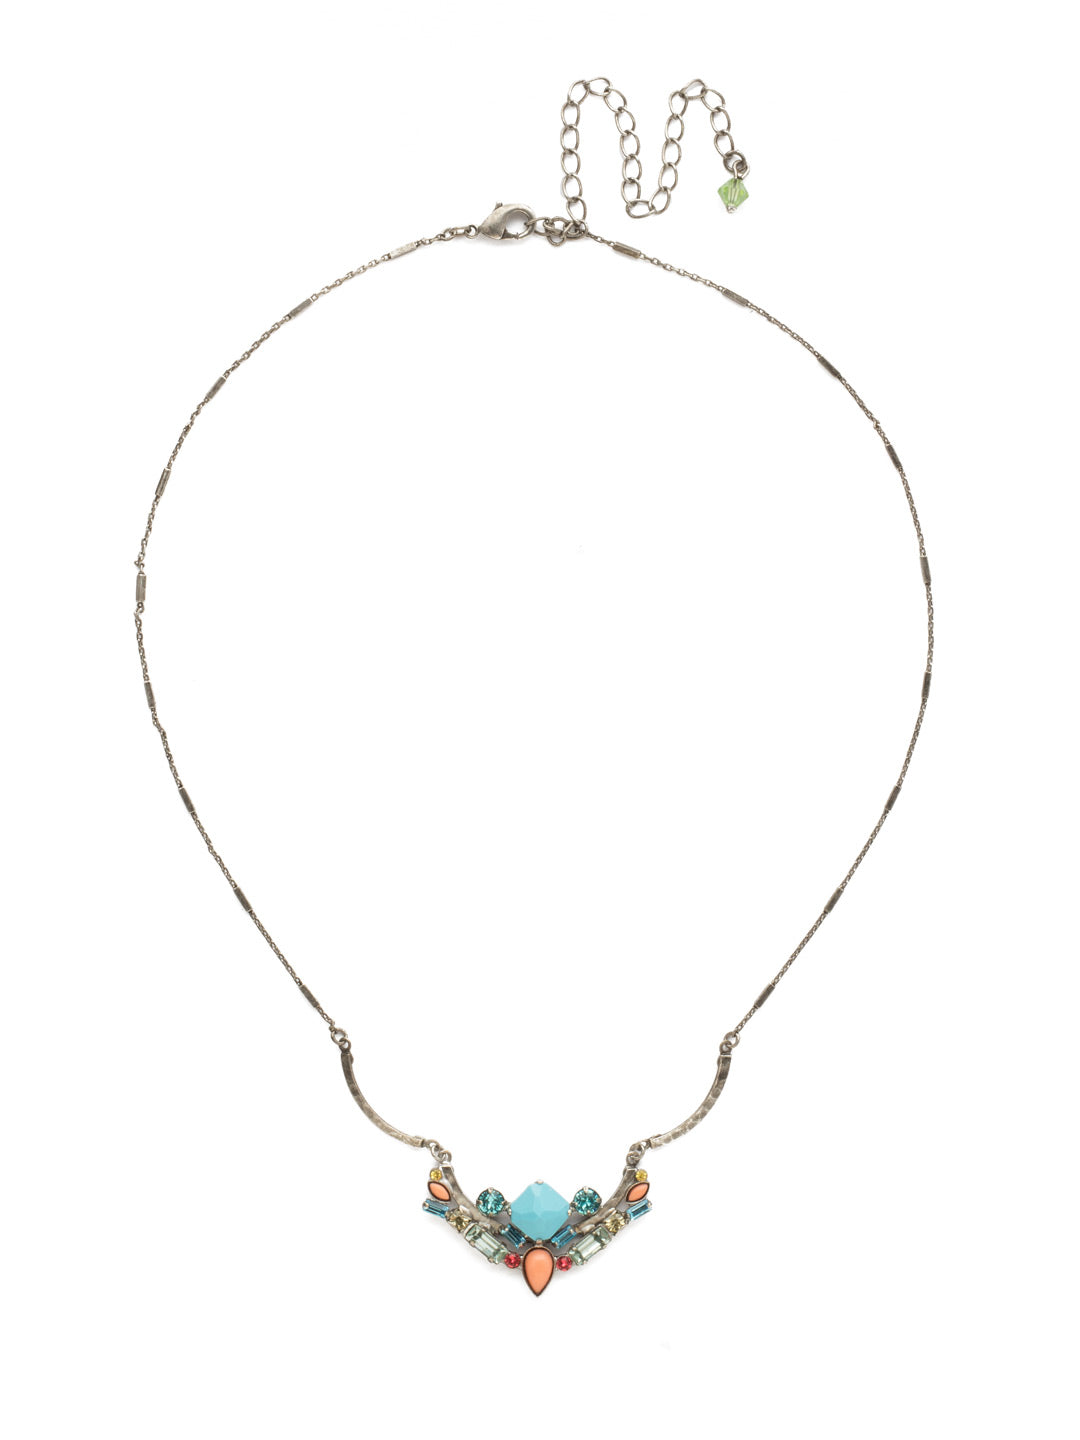 Cassia Necklace - NDR9ASVH - <p>Slim baguettes and petite crystal rounds nestle between pear and diamond-shaped cabochons for a modern mixture of semi-precious and sparkle. From Sorrelli's Vivid Horizons collection in our Antique Silver-tone finish.</p>